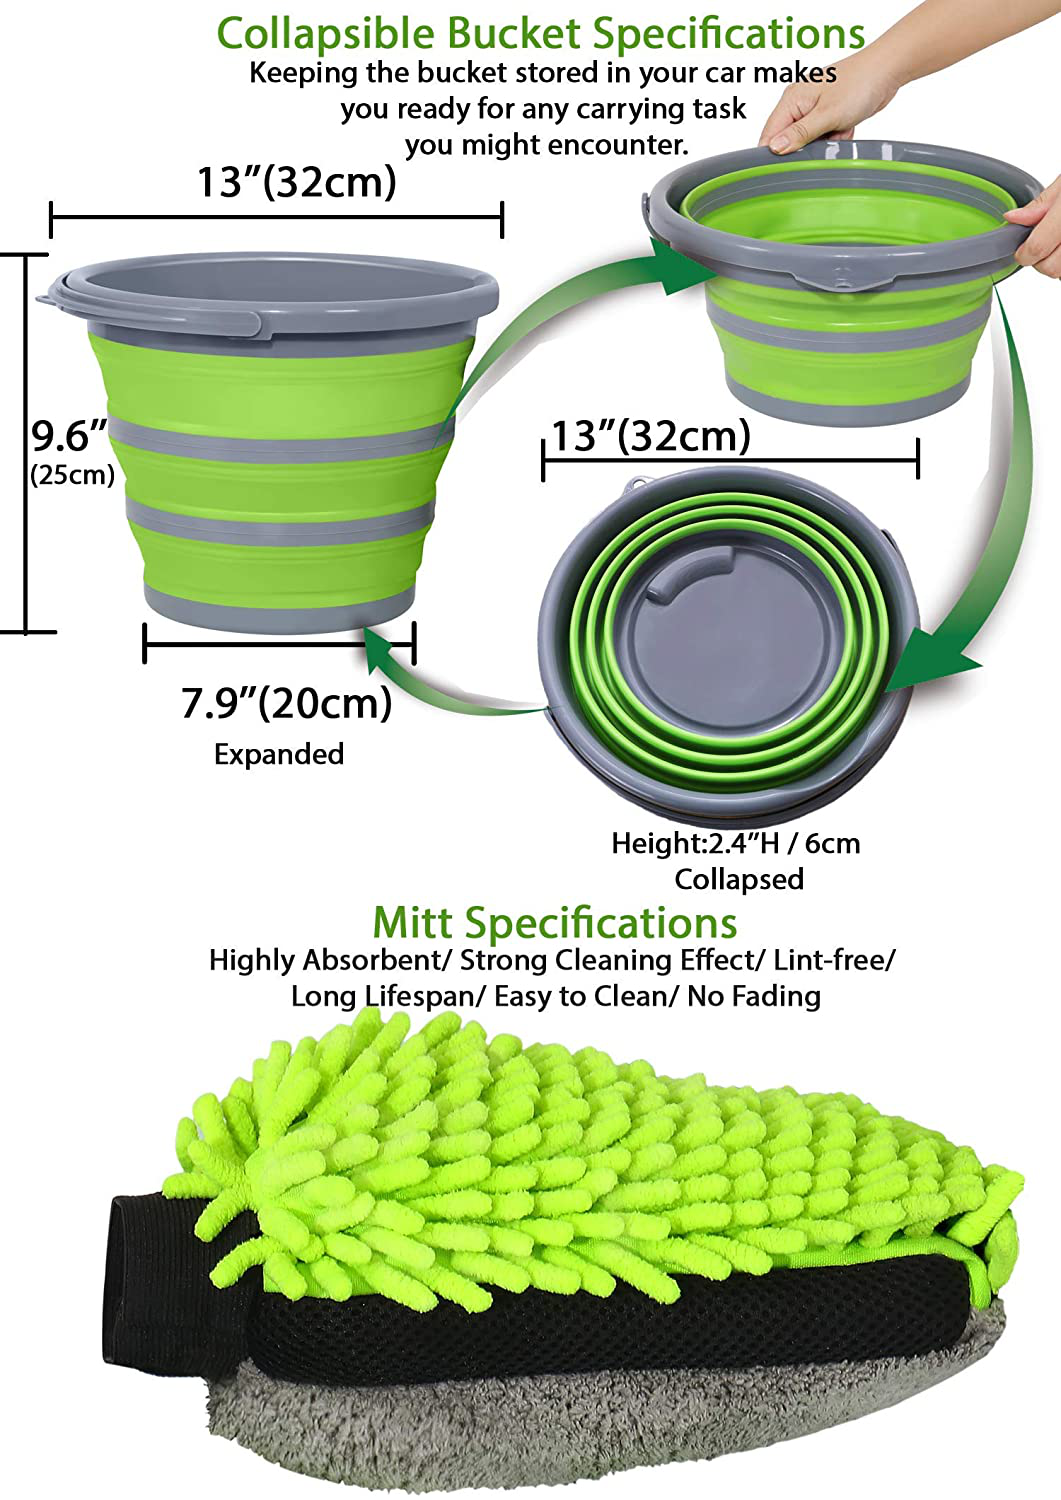 GreatCool Car Wash Collapsible Bucket with 3-in-1 Car Wash Mitt, Coral Velvet + Weave + Chenille Microfiber Glove Sponge, 10L (2.6 Gallon) Portable Folding Basin Pail for Car Household Cleaning